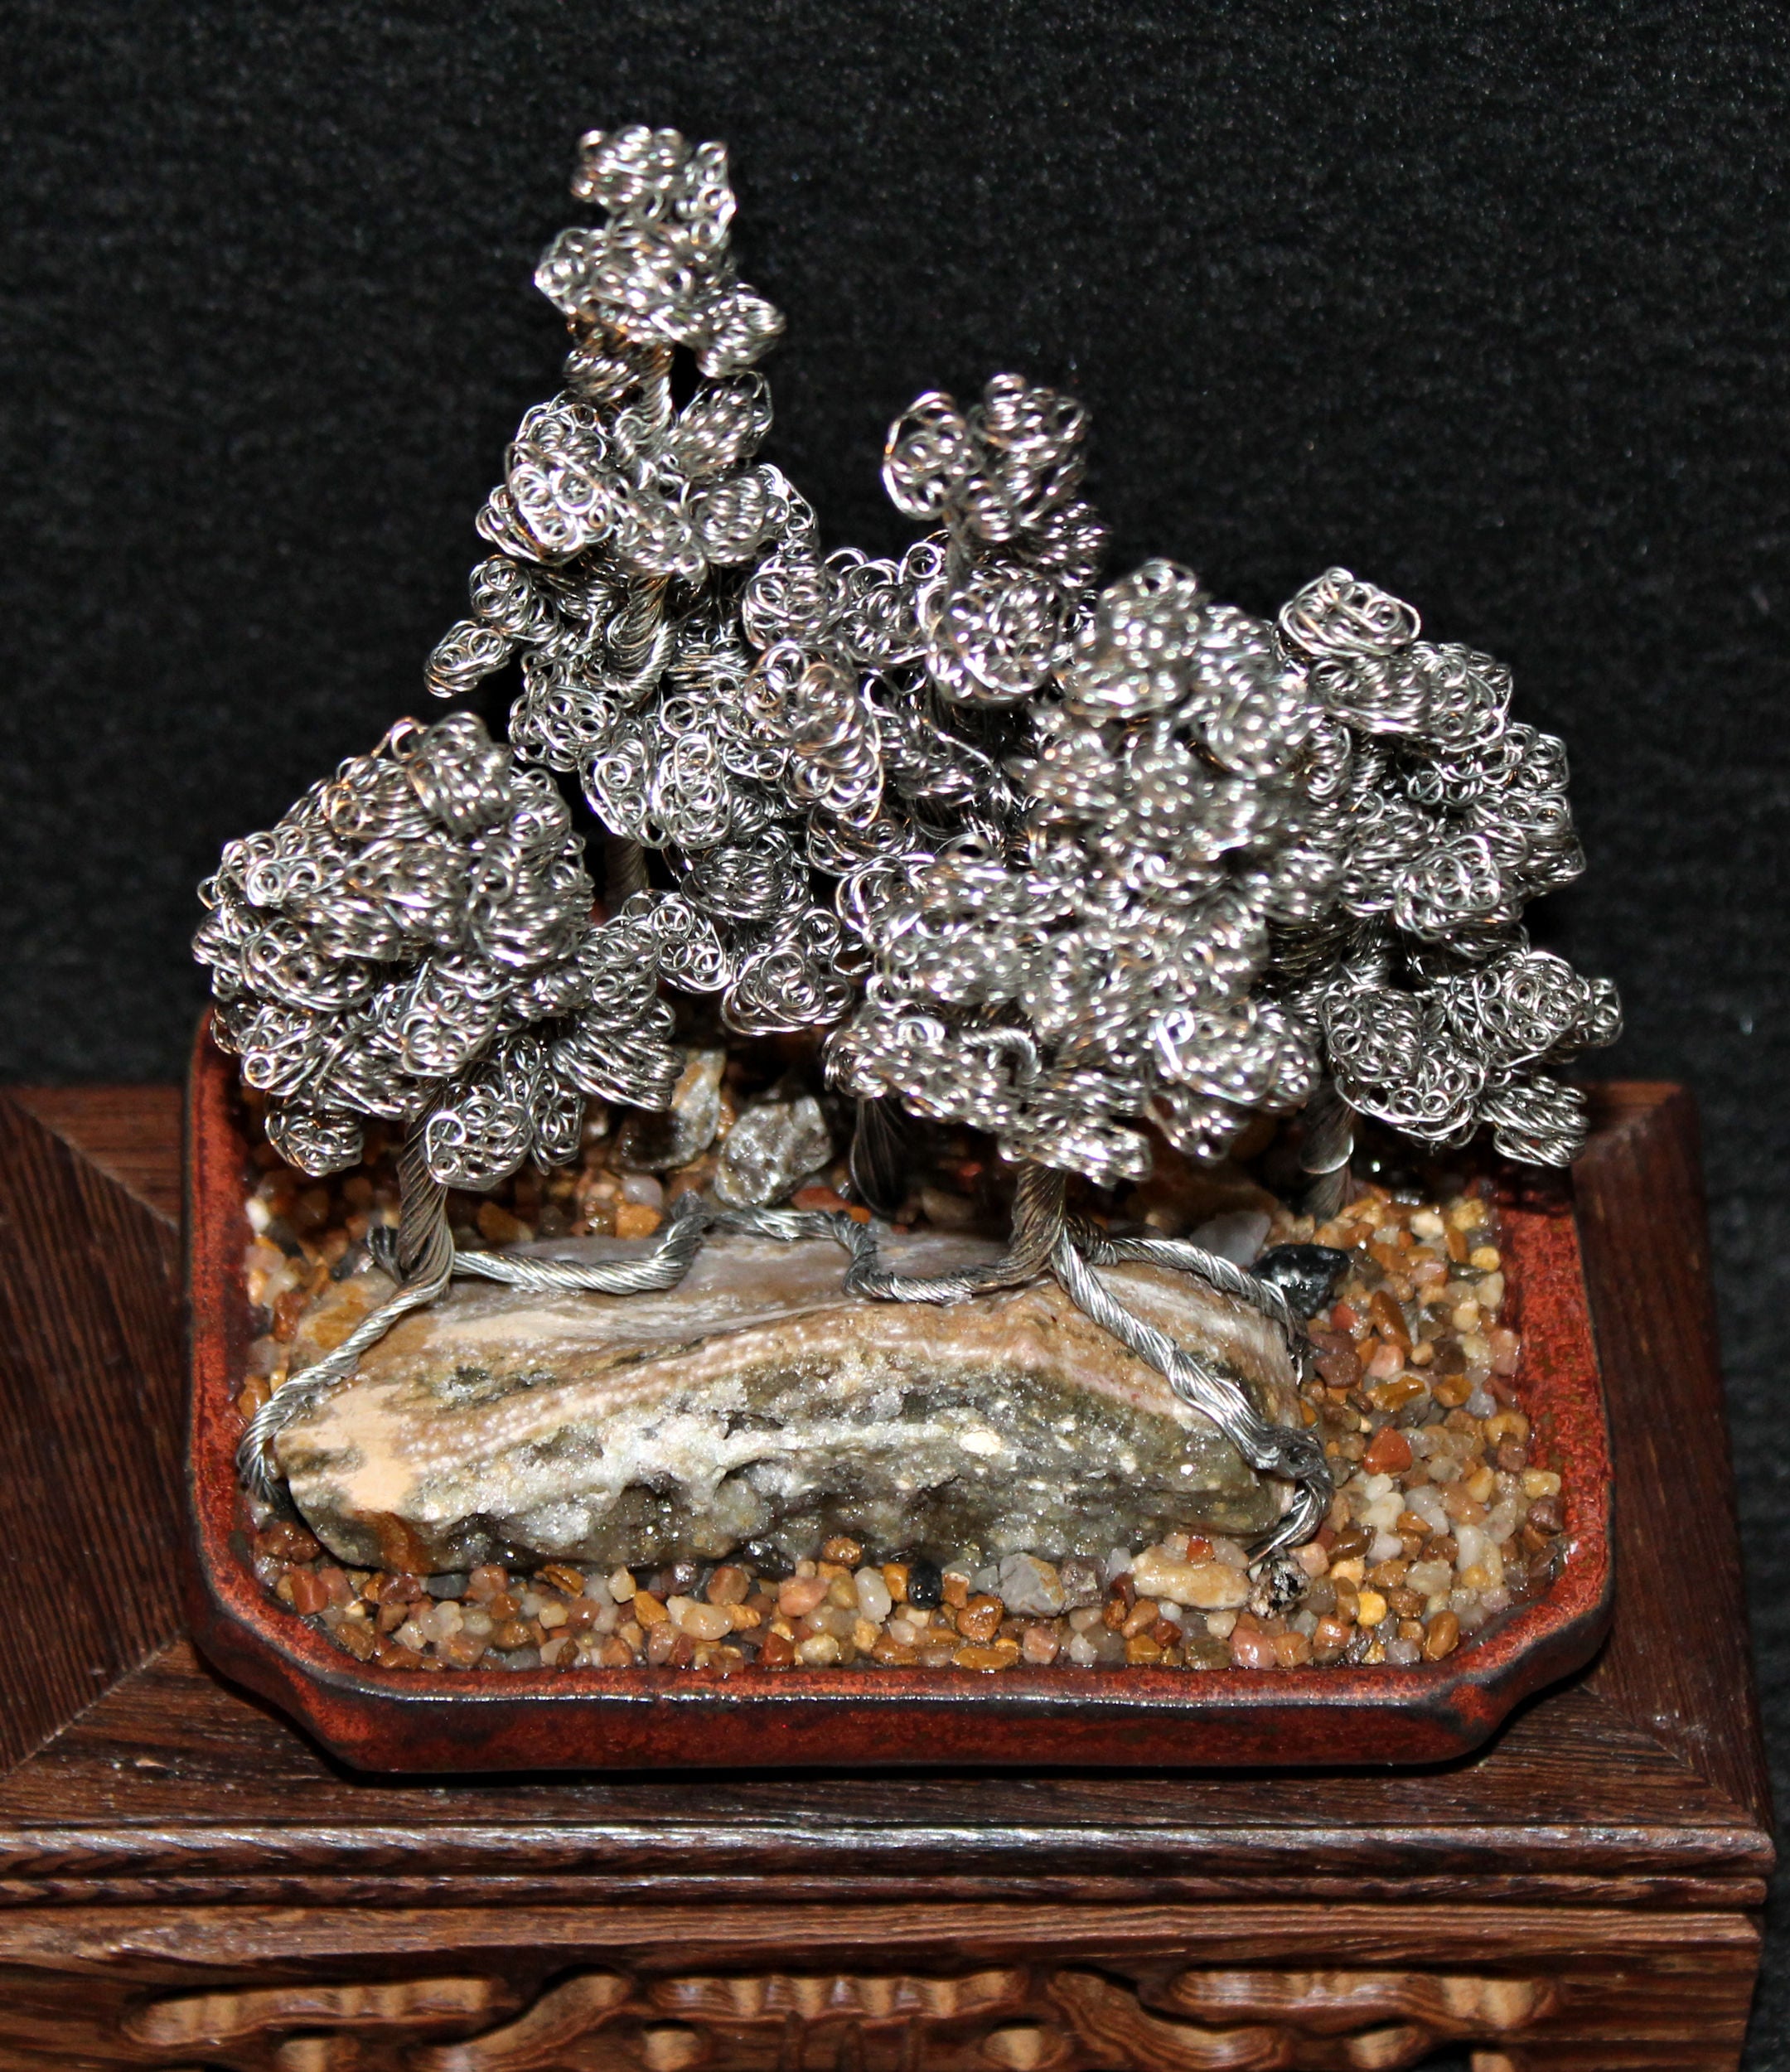 Silver Pine Bonsai Forest with Ocean Jasper and Petrified Wood - SOLD